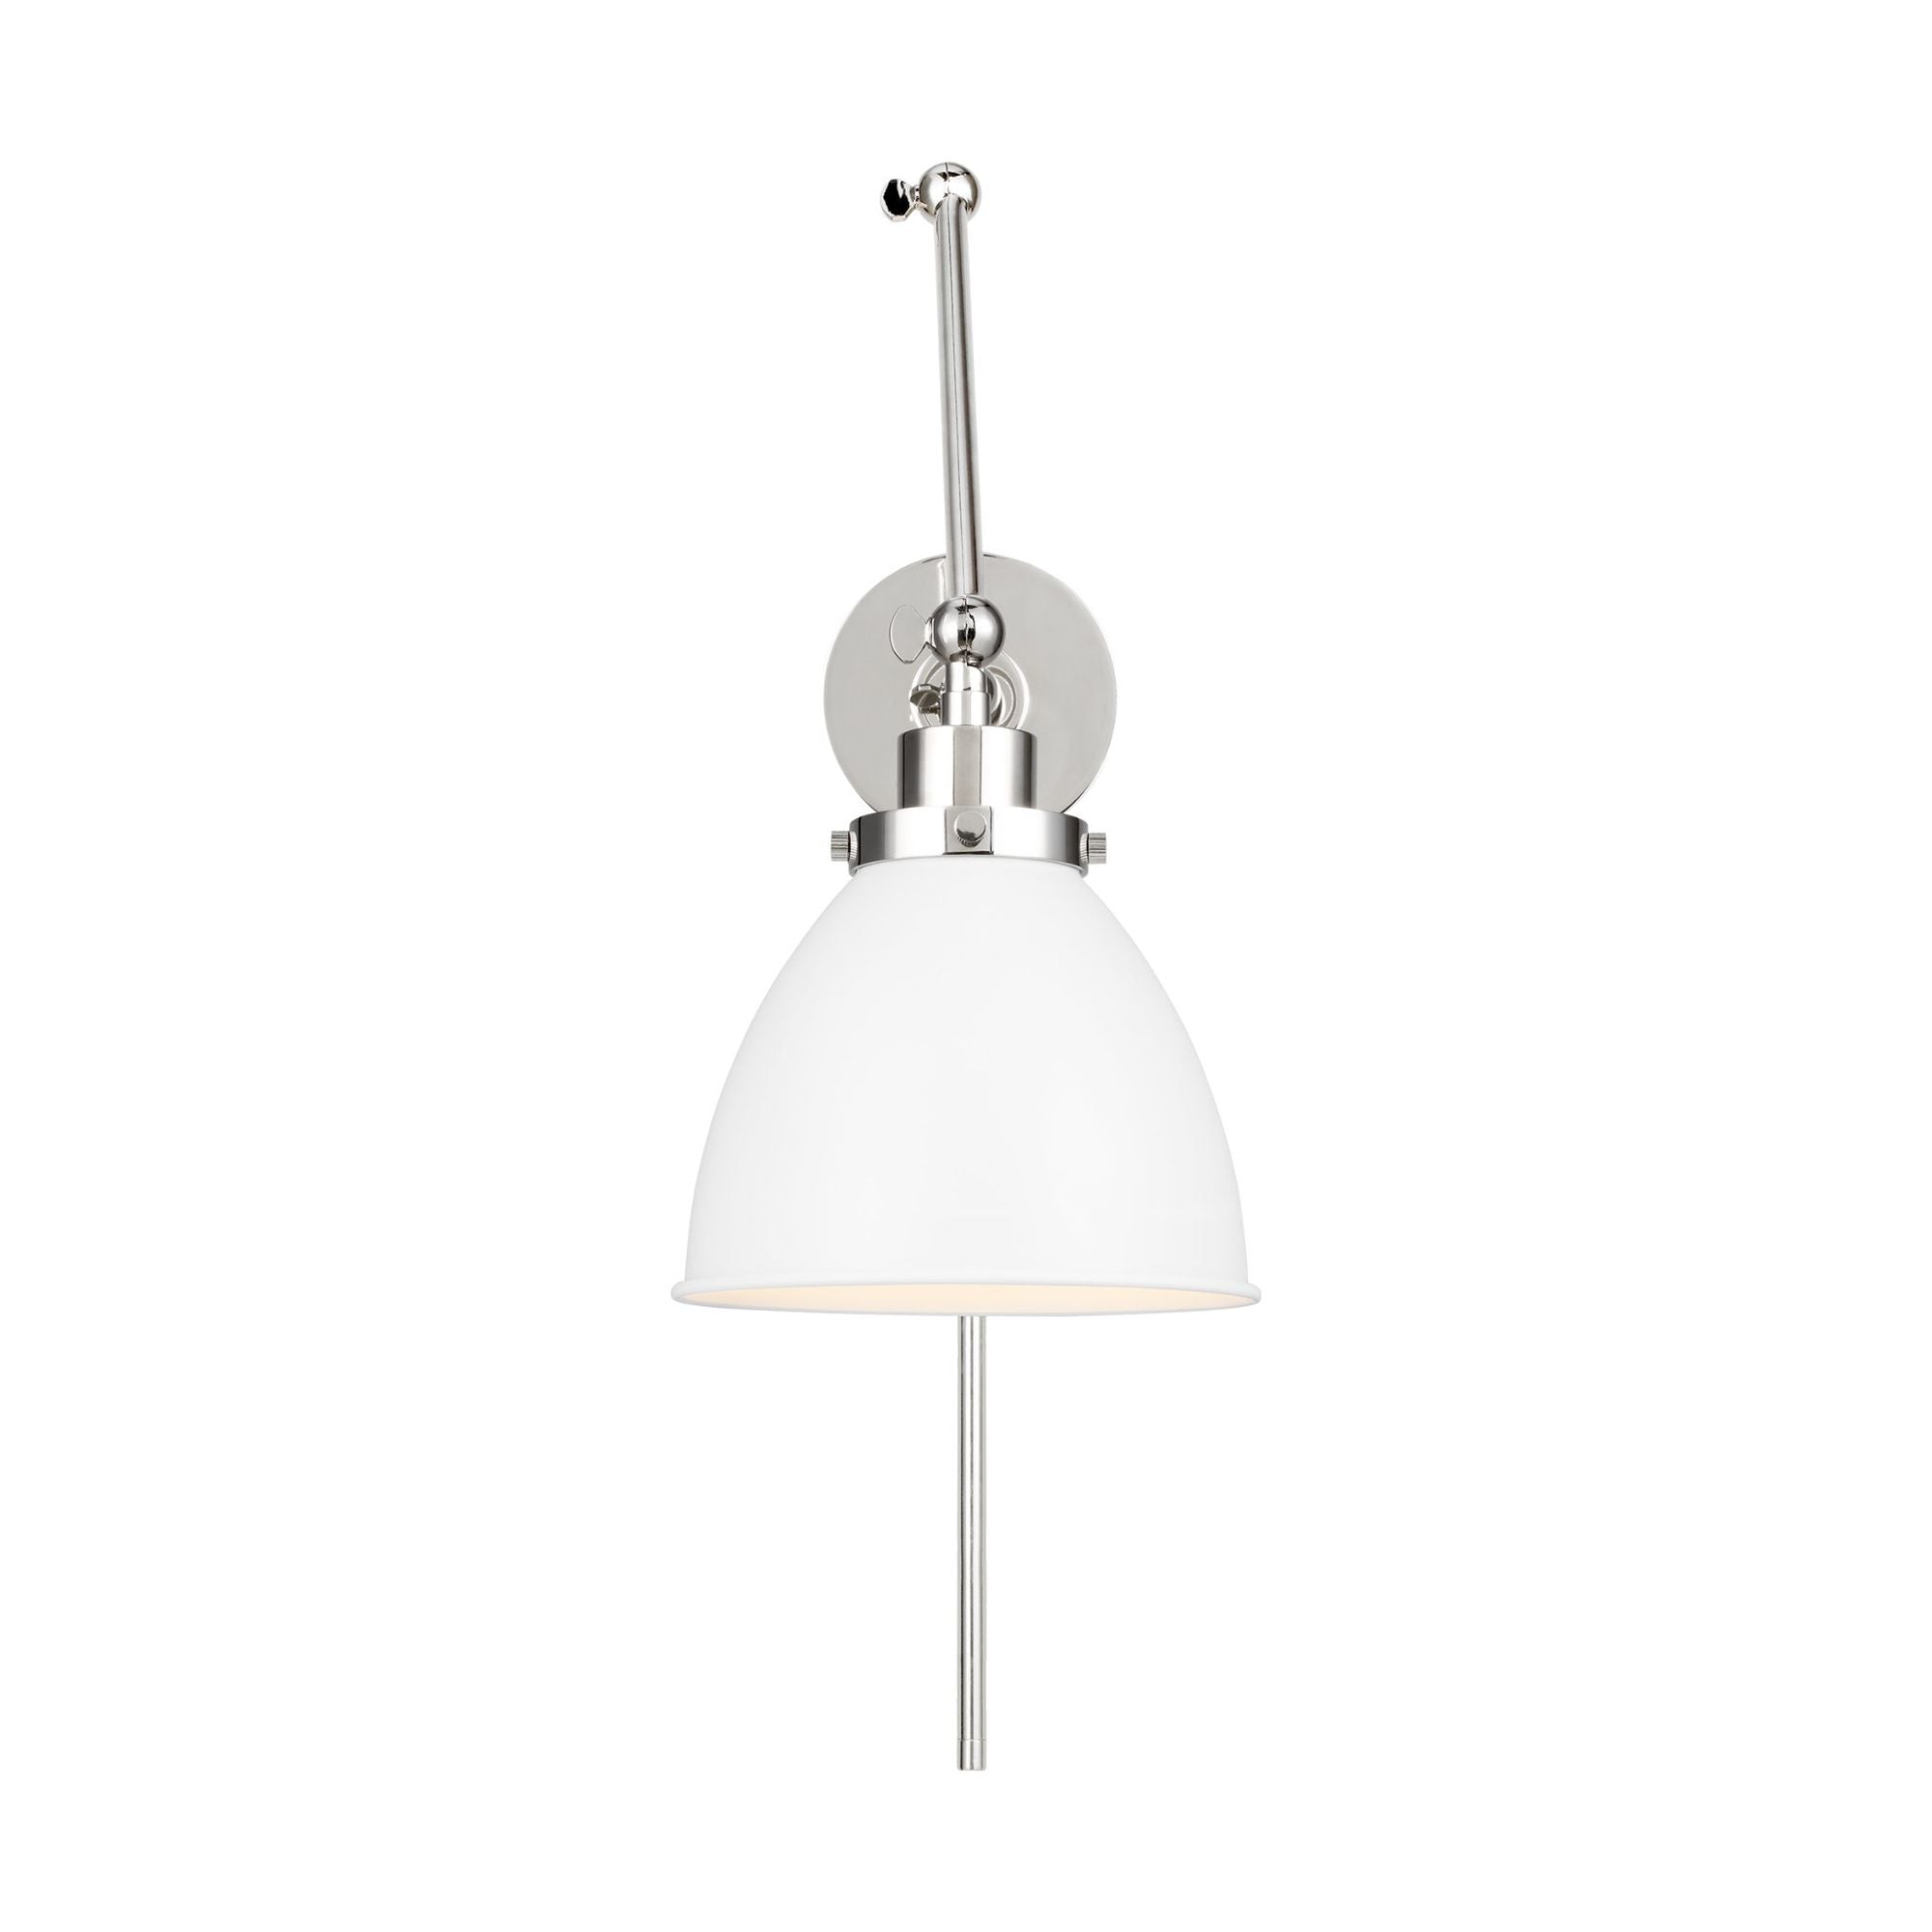 Chapman & Myers Wellfleet Double Arm Dome Task Sconce in Matte White and Polished Nickel